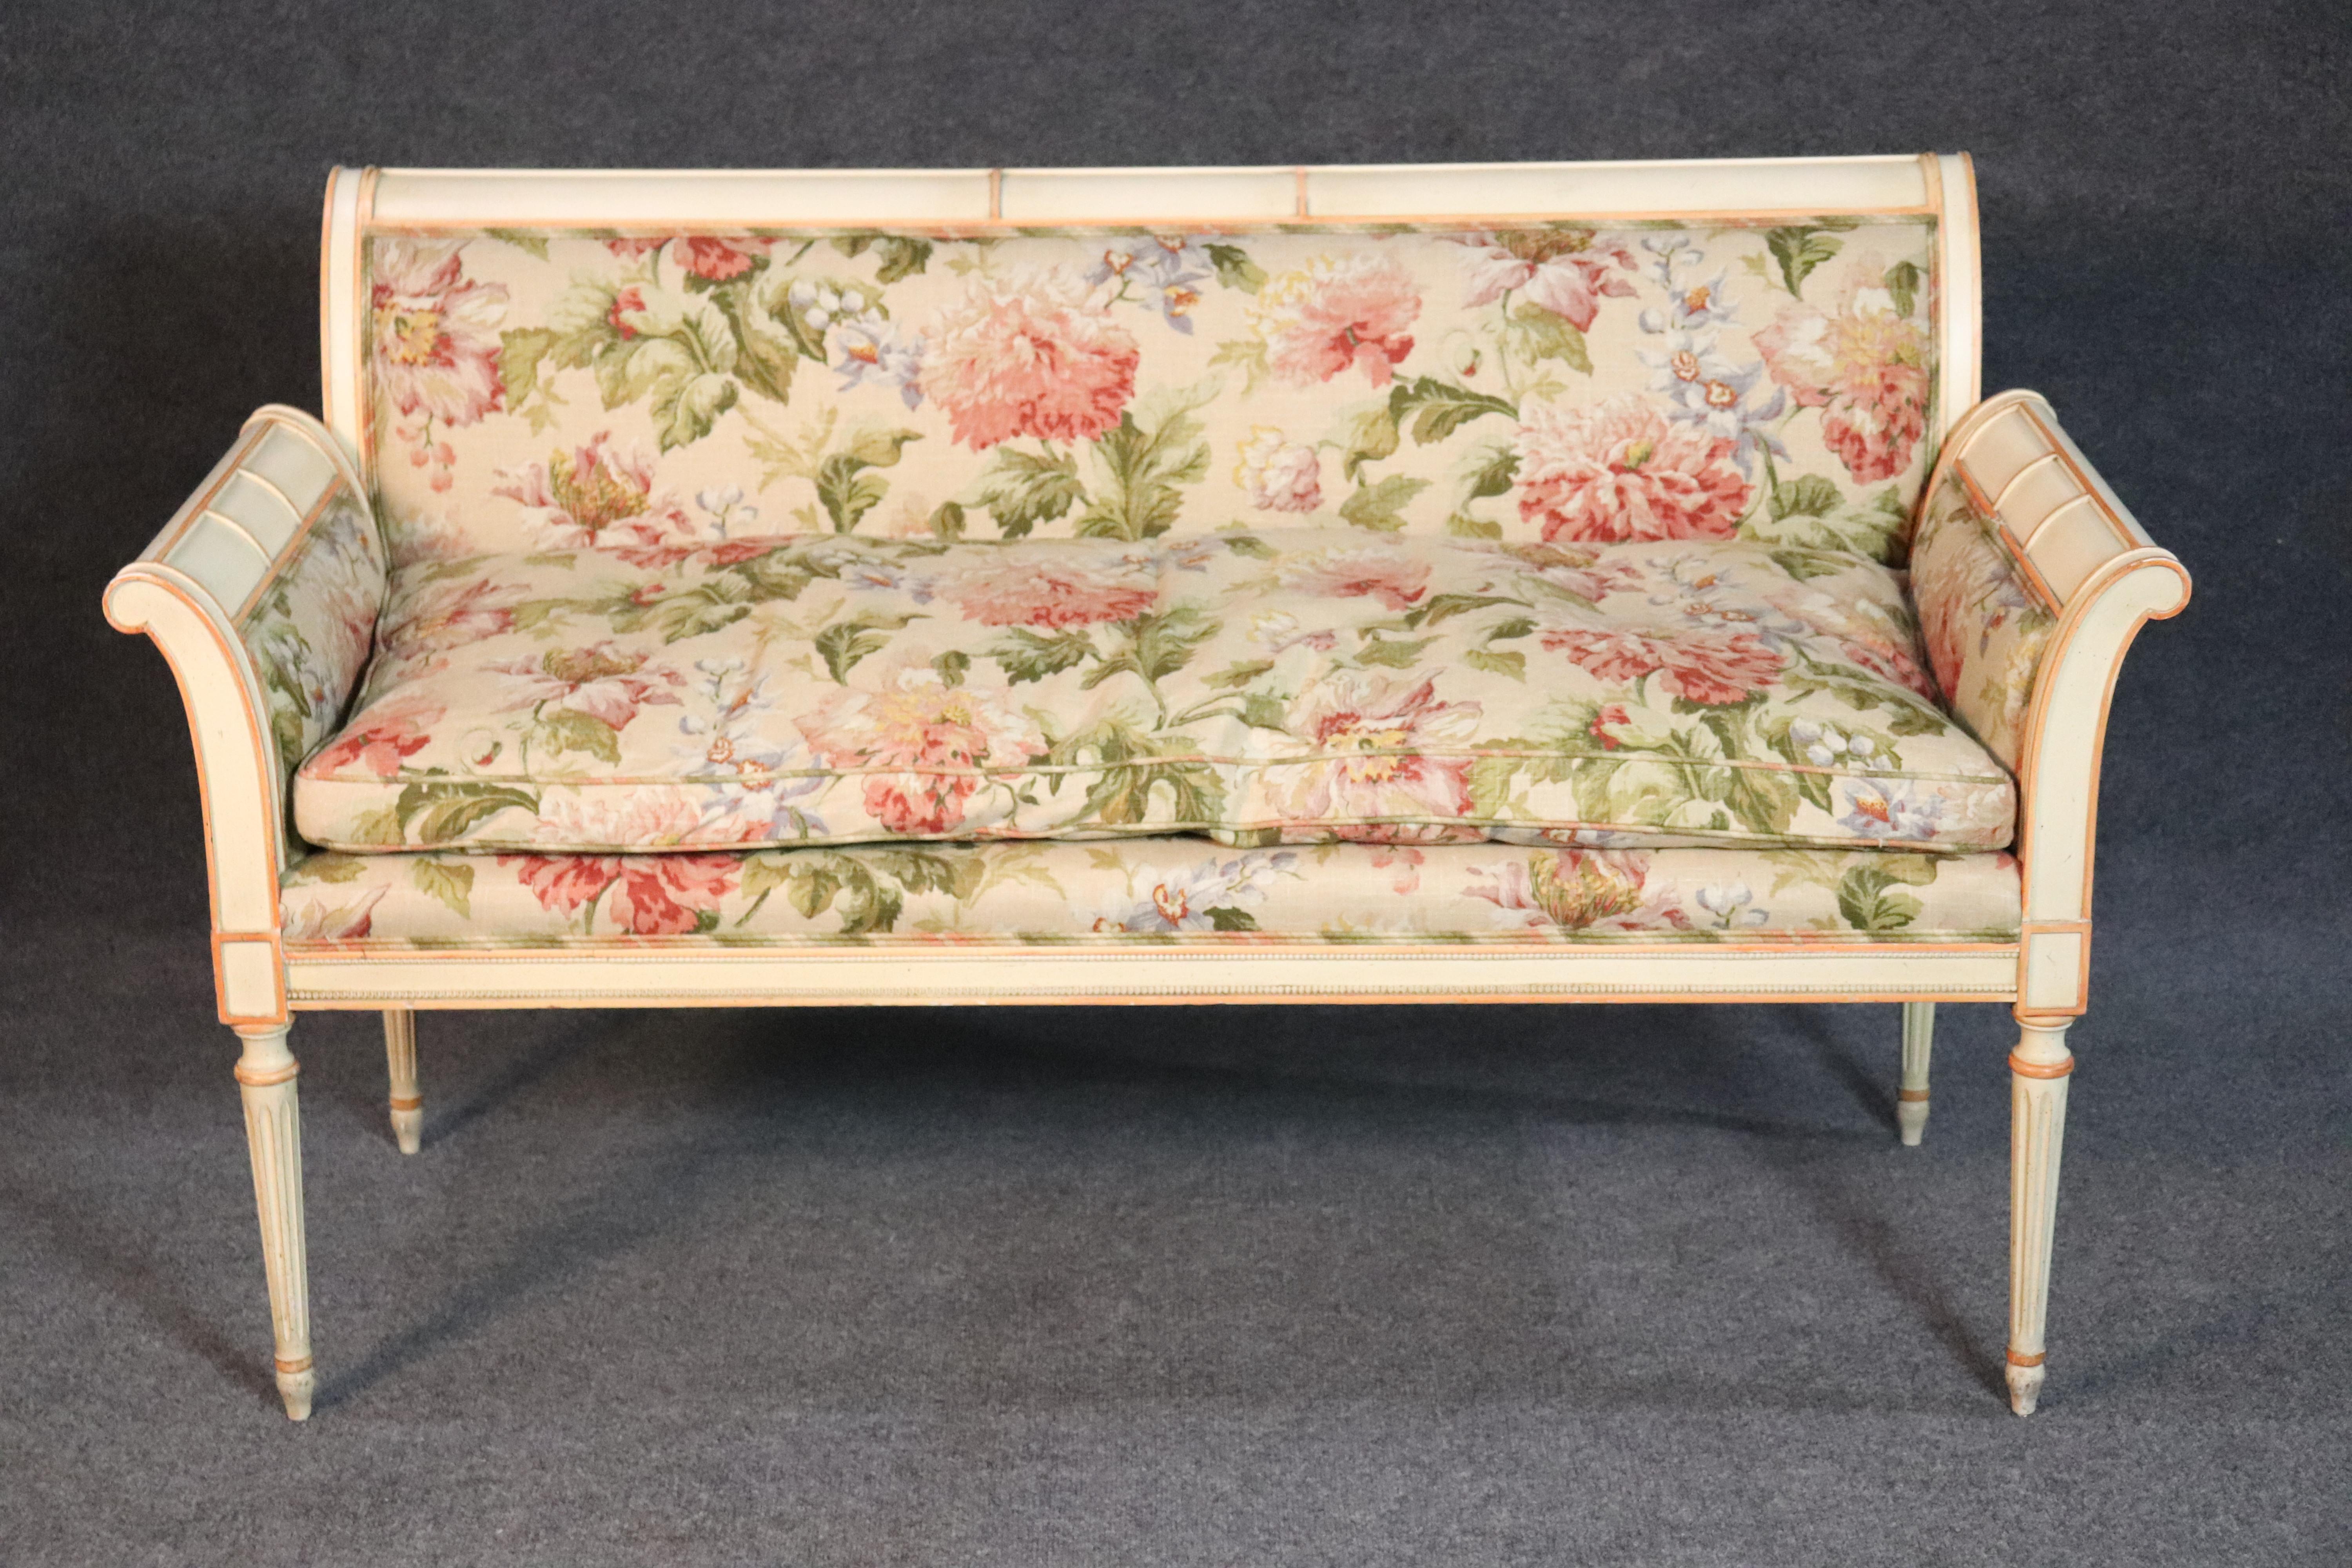 This is a beautiful and charming settee, with tons of quality and good taste! The floral linen upholstery is a very expensive fabric and is in excellent condition. The upholstery covers a genuine goose feather down cushion for maximum comfort. The